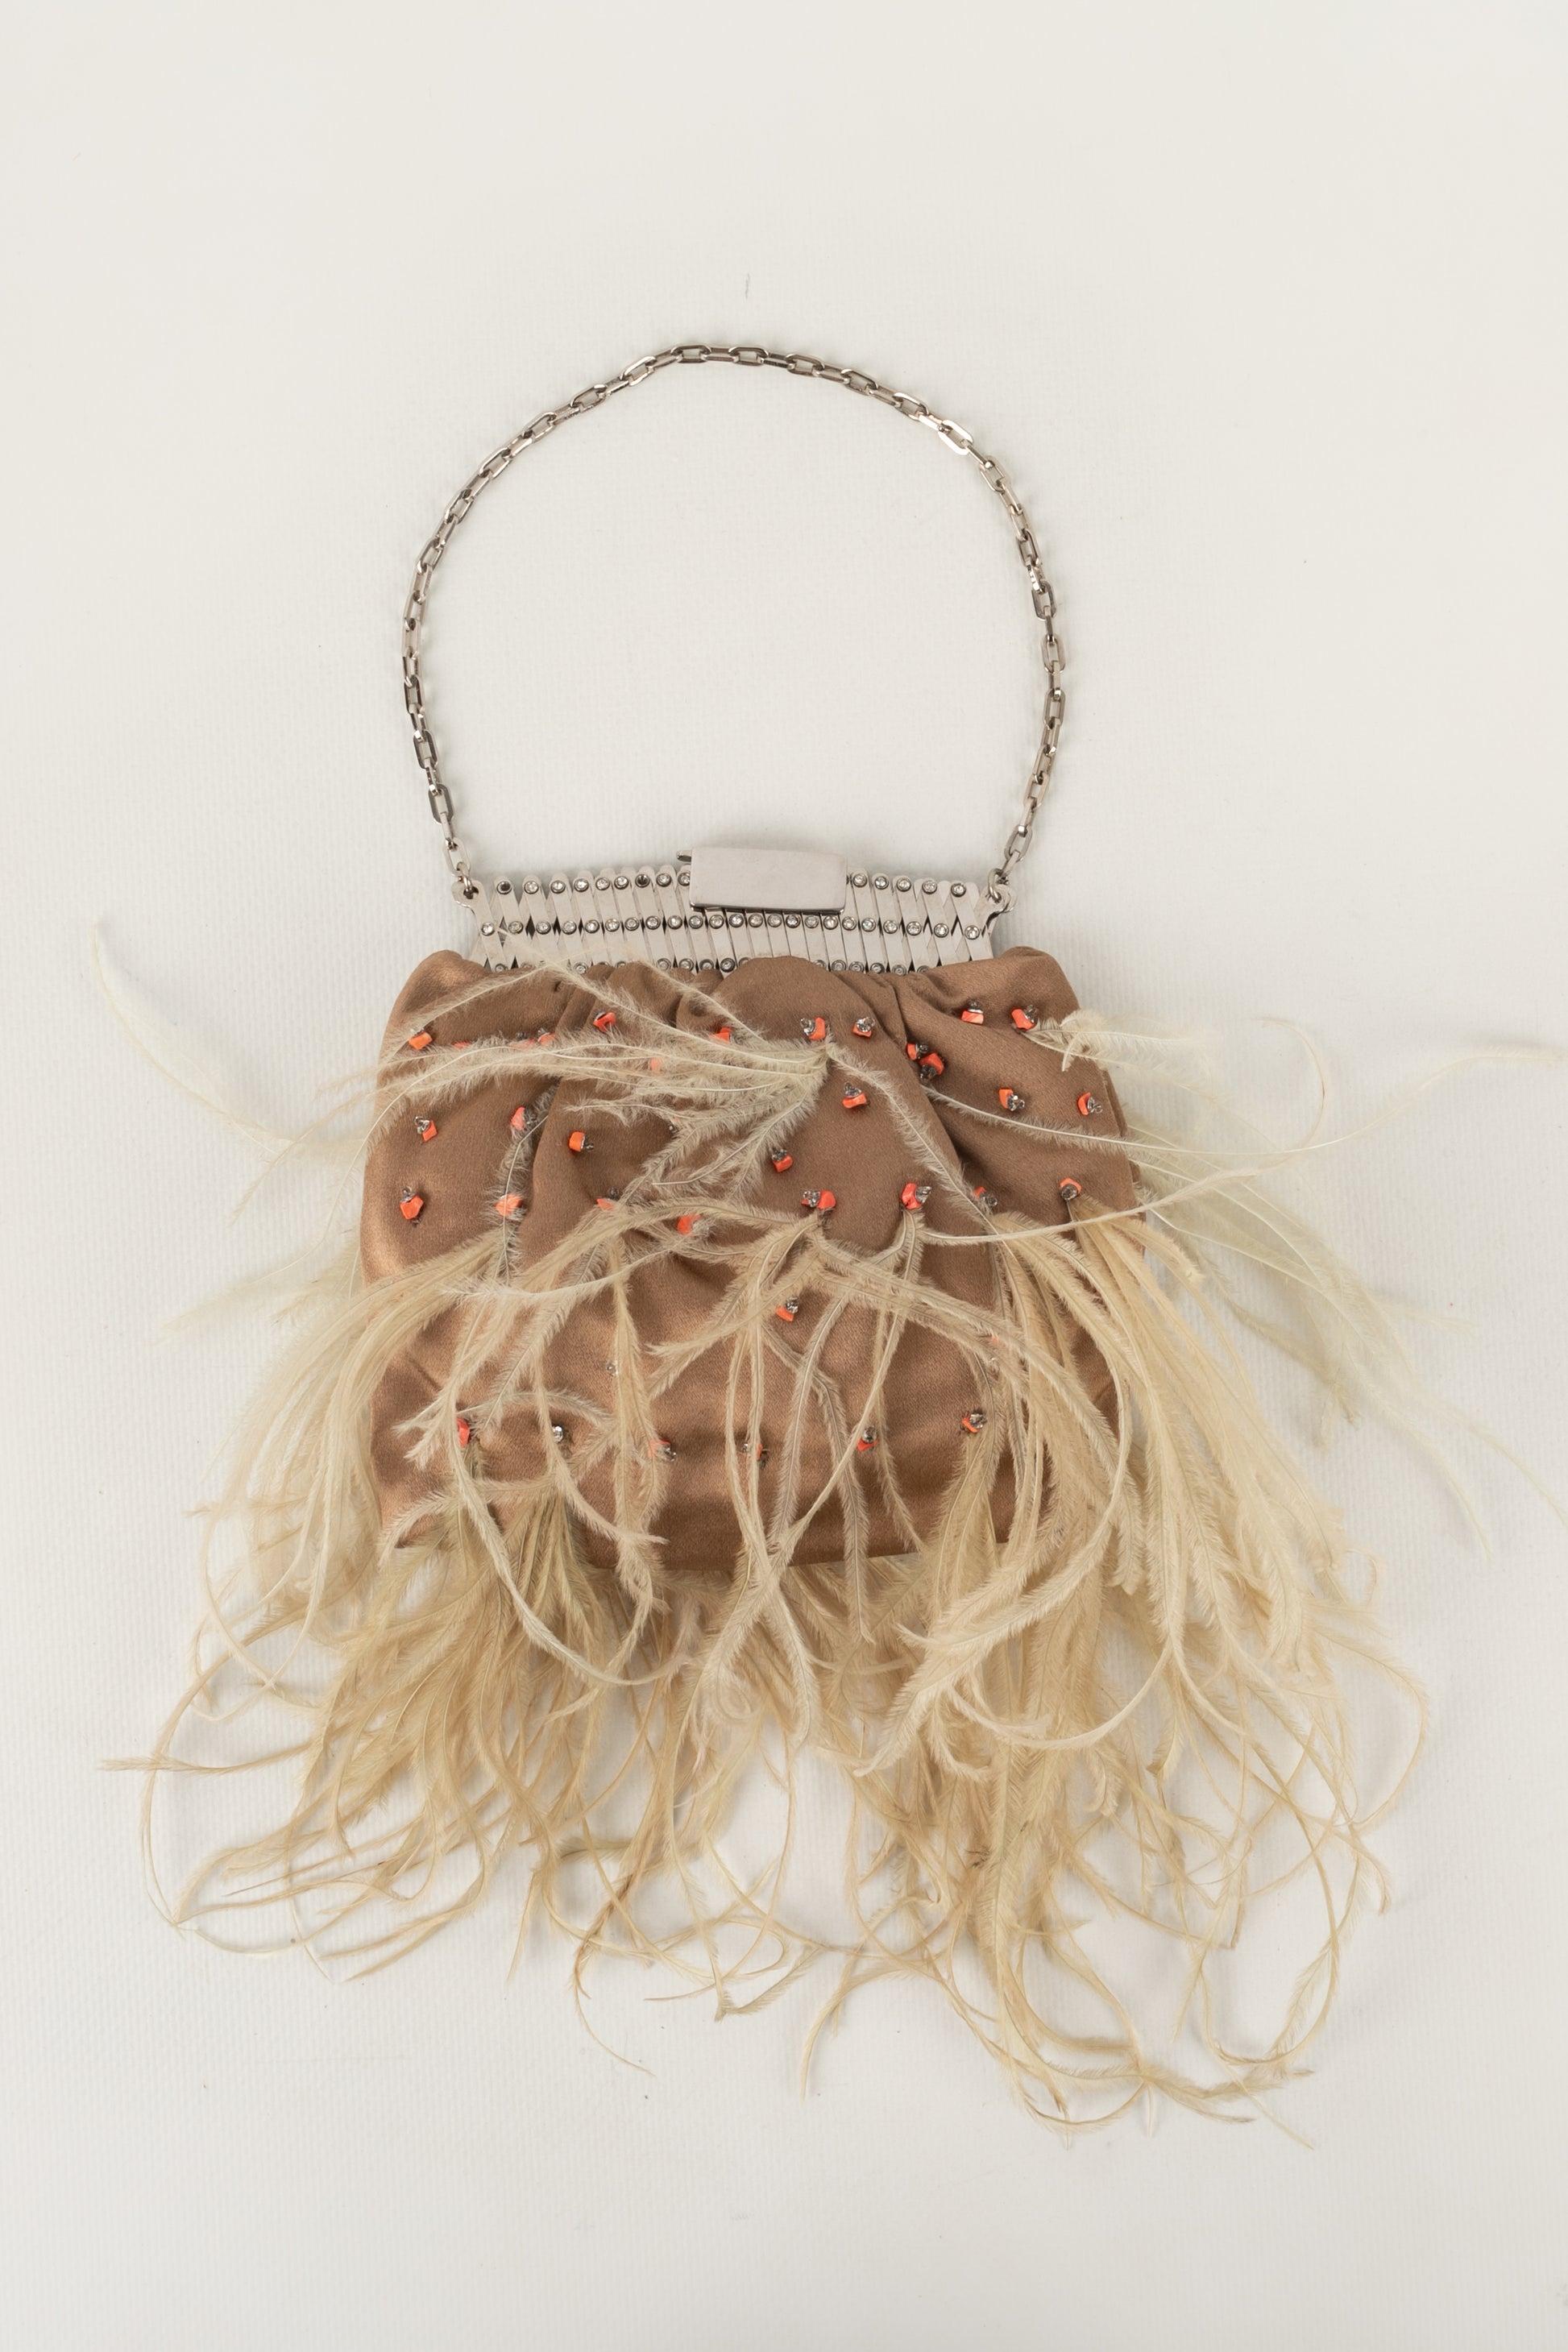 Valentino - Beige silk satin tiny bag ornamented with feathers, rhinestones, and pearls.

Additional information:
Condition: Very good condition
Dimensions: Height: 13 cm - Length: 15 cm - Depth: 3 cm - Handles: 29 cm

Seller Reference: S175
